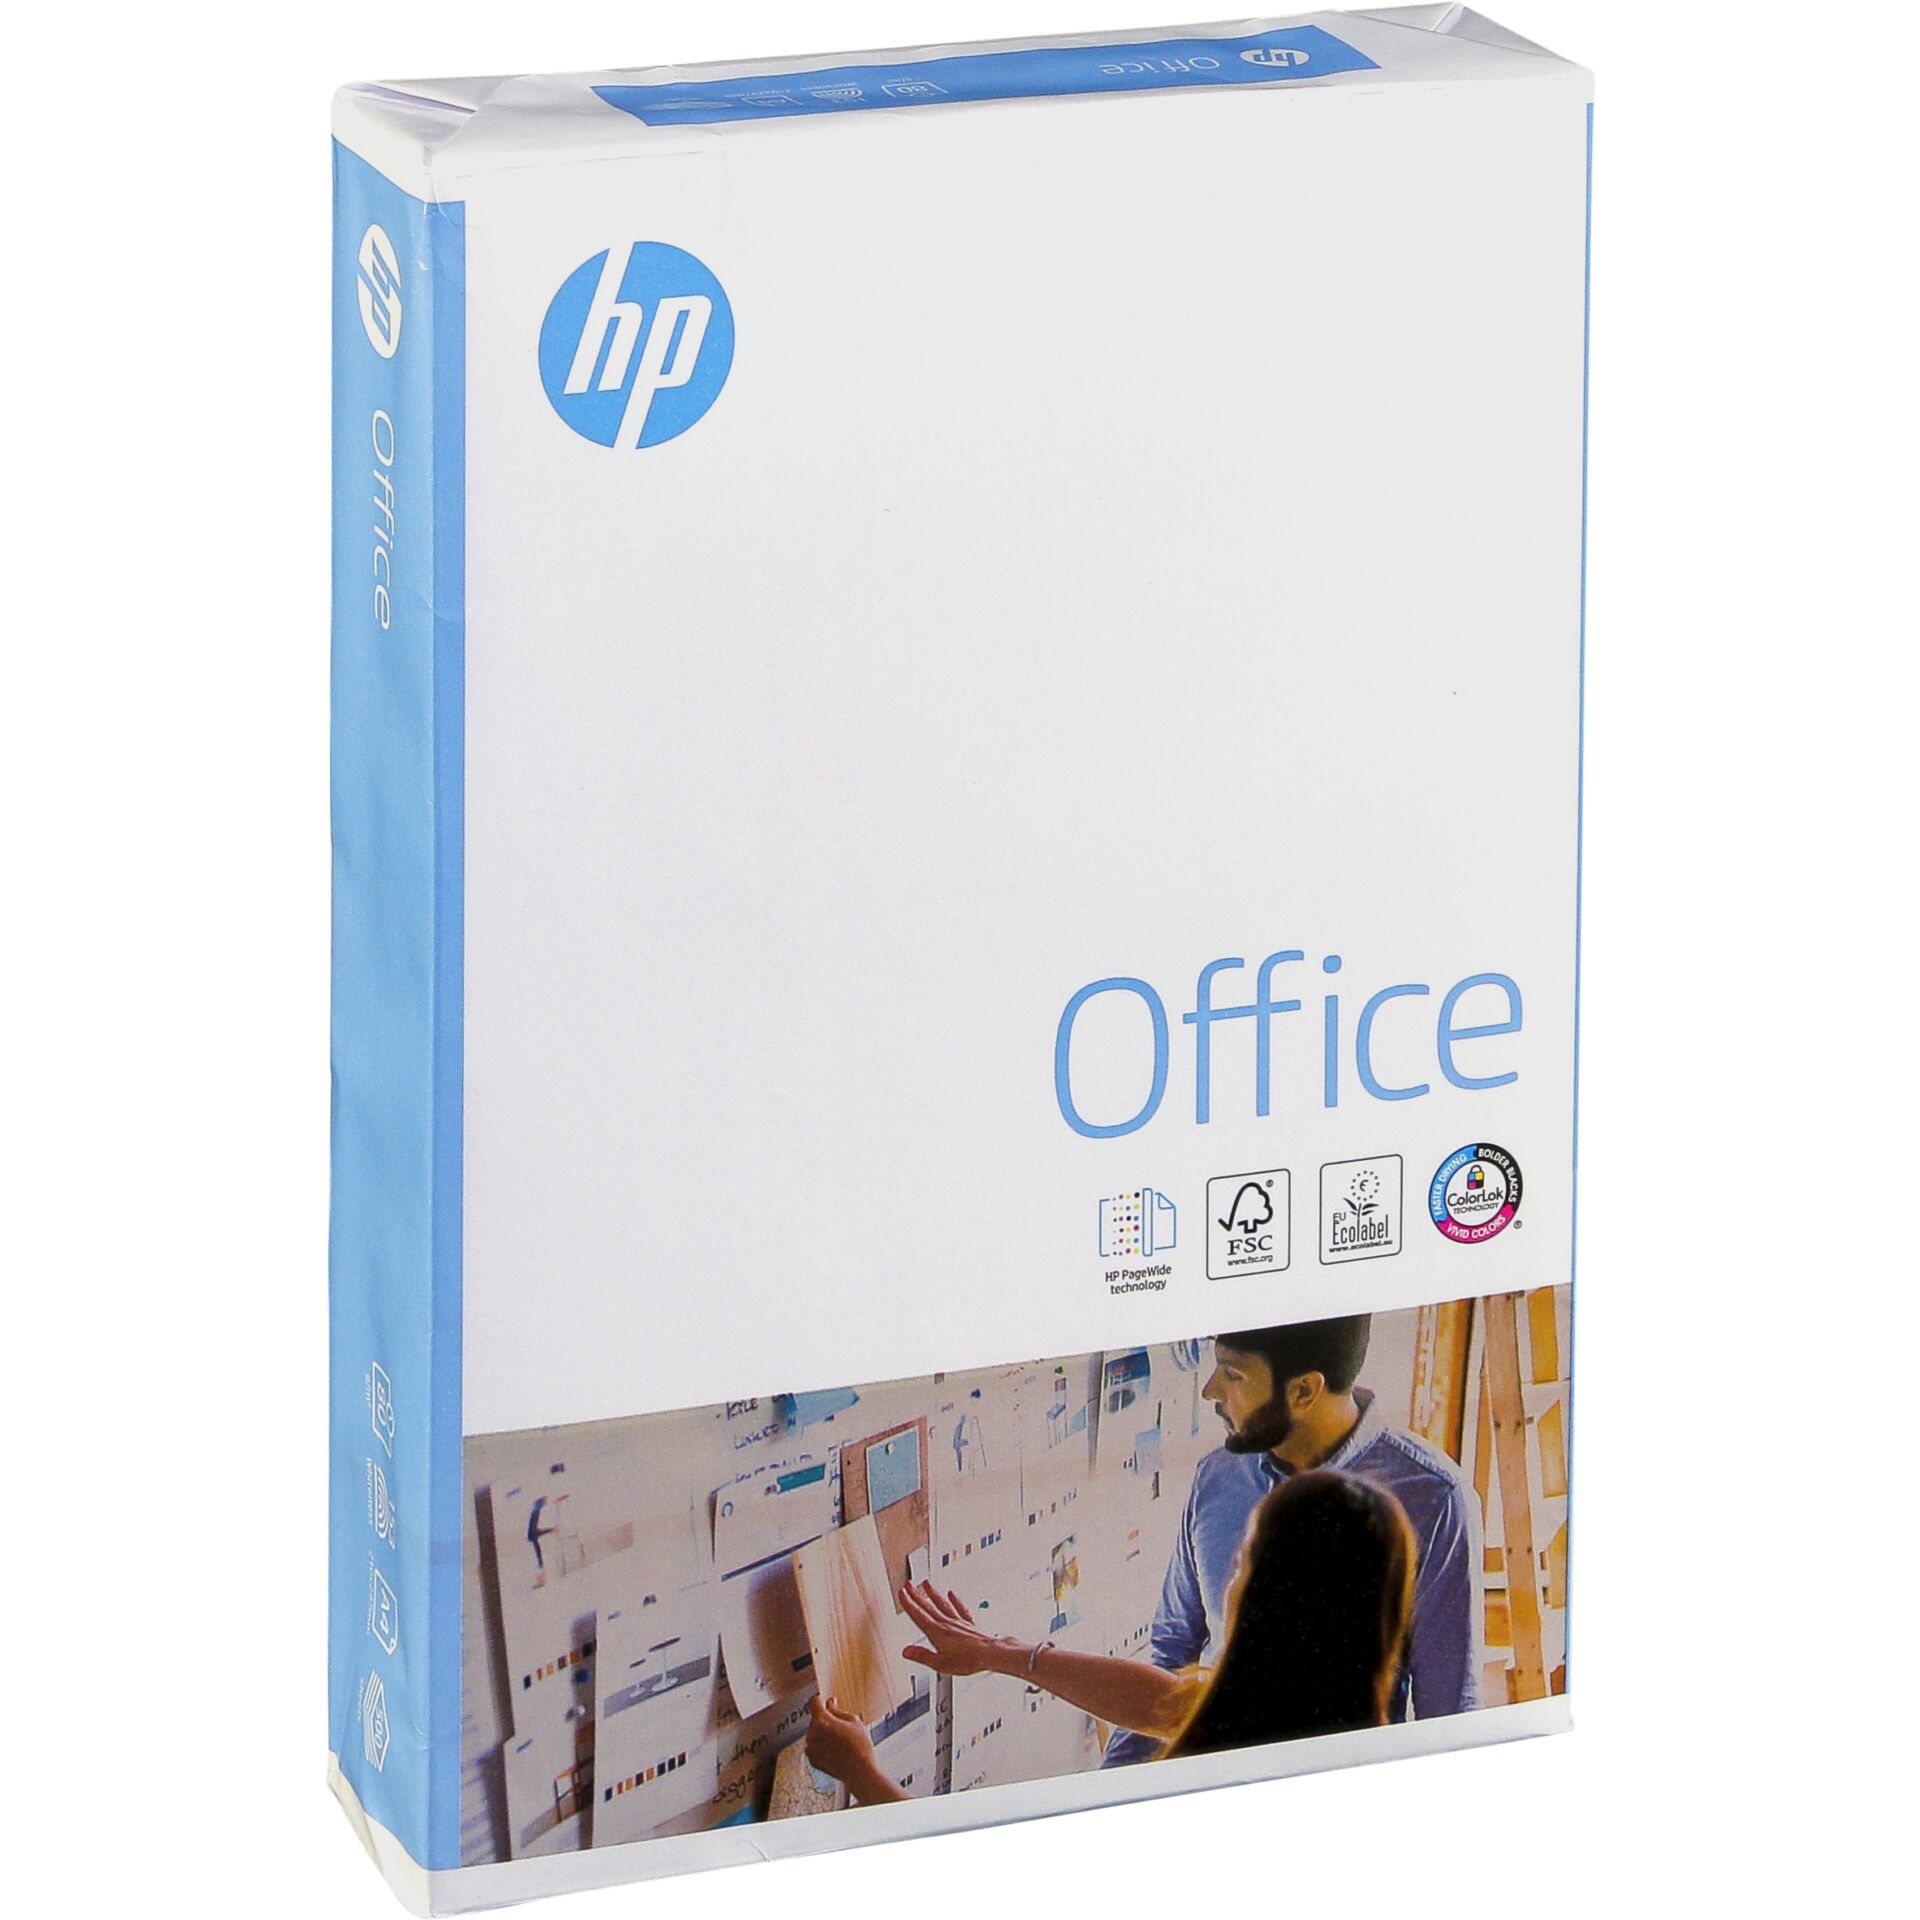 HP Office white CHP 110 A 4, 80 g, 500 Sheets